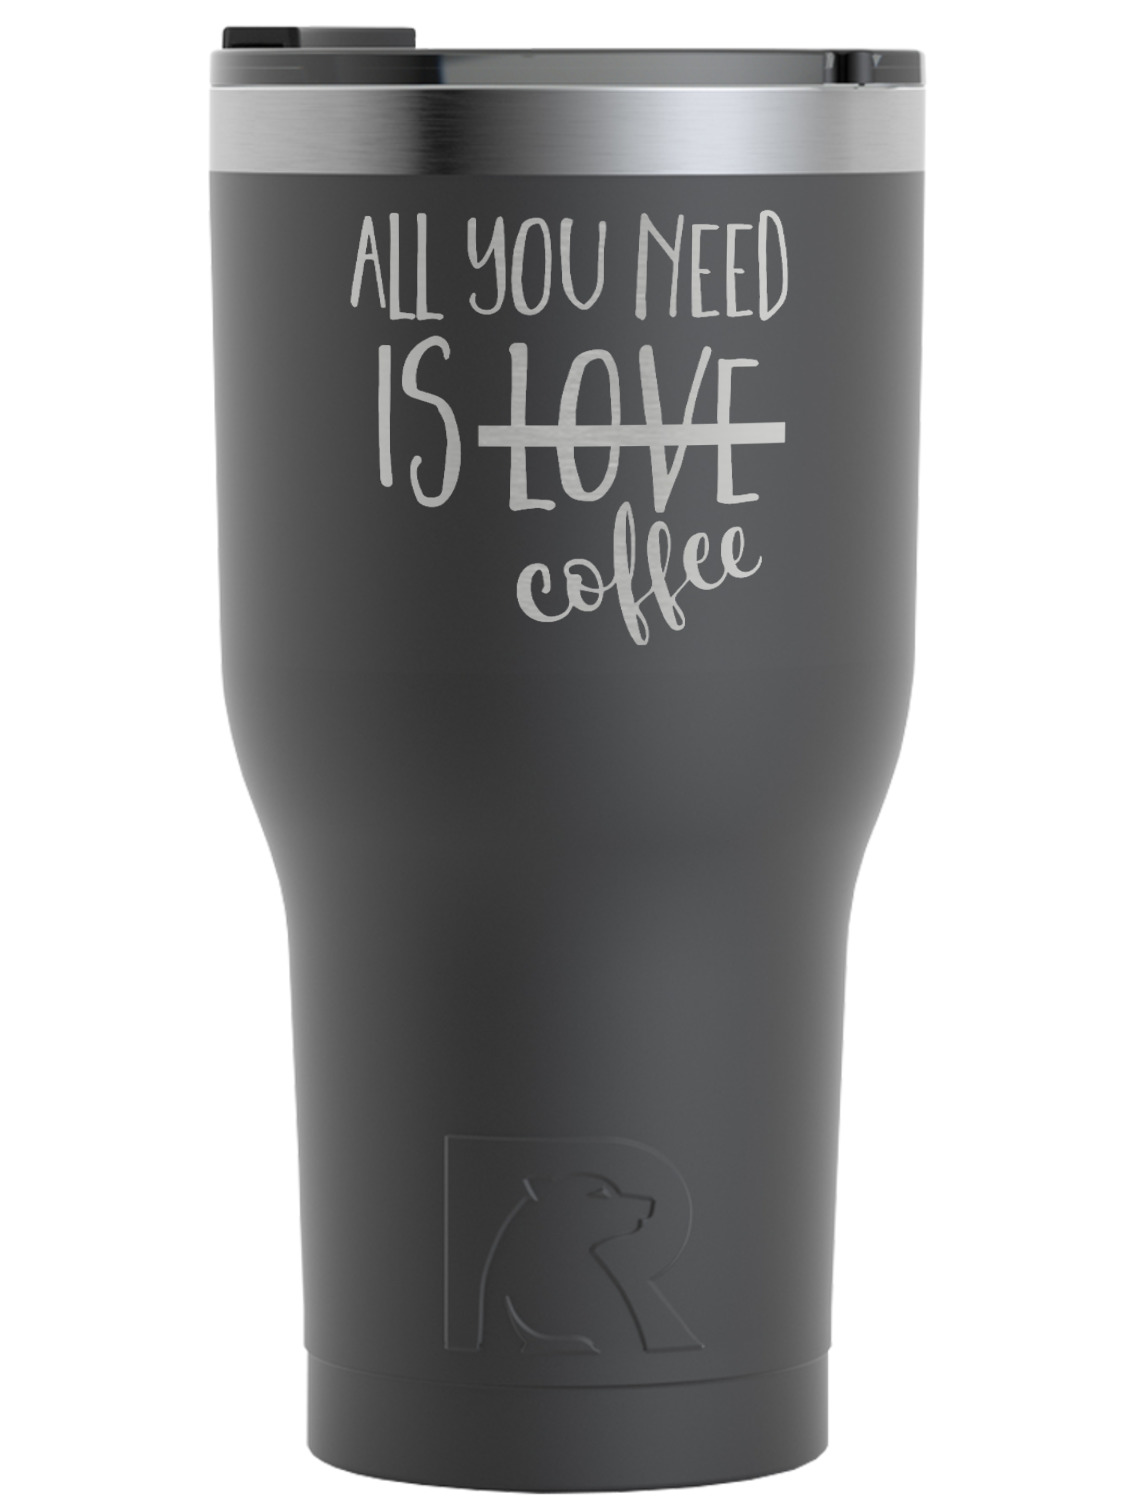 https://www.youcustomizeit.com/common/MAKE/906415/Coffee-Lover-Black-RTIC-Tumbler-Front.jpg?lm=1665683483